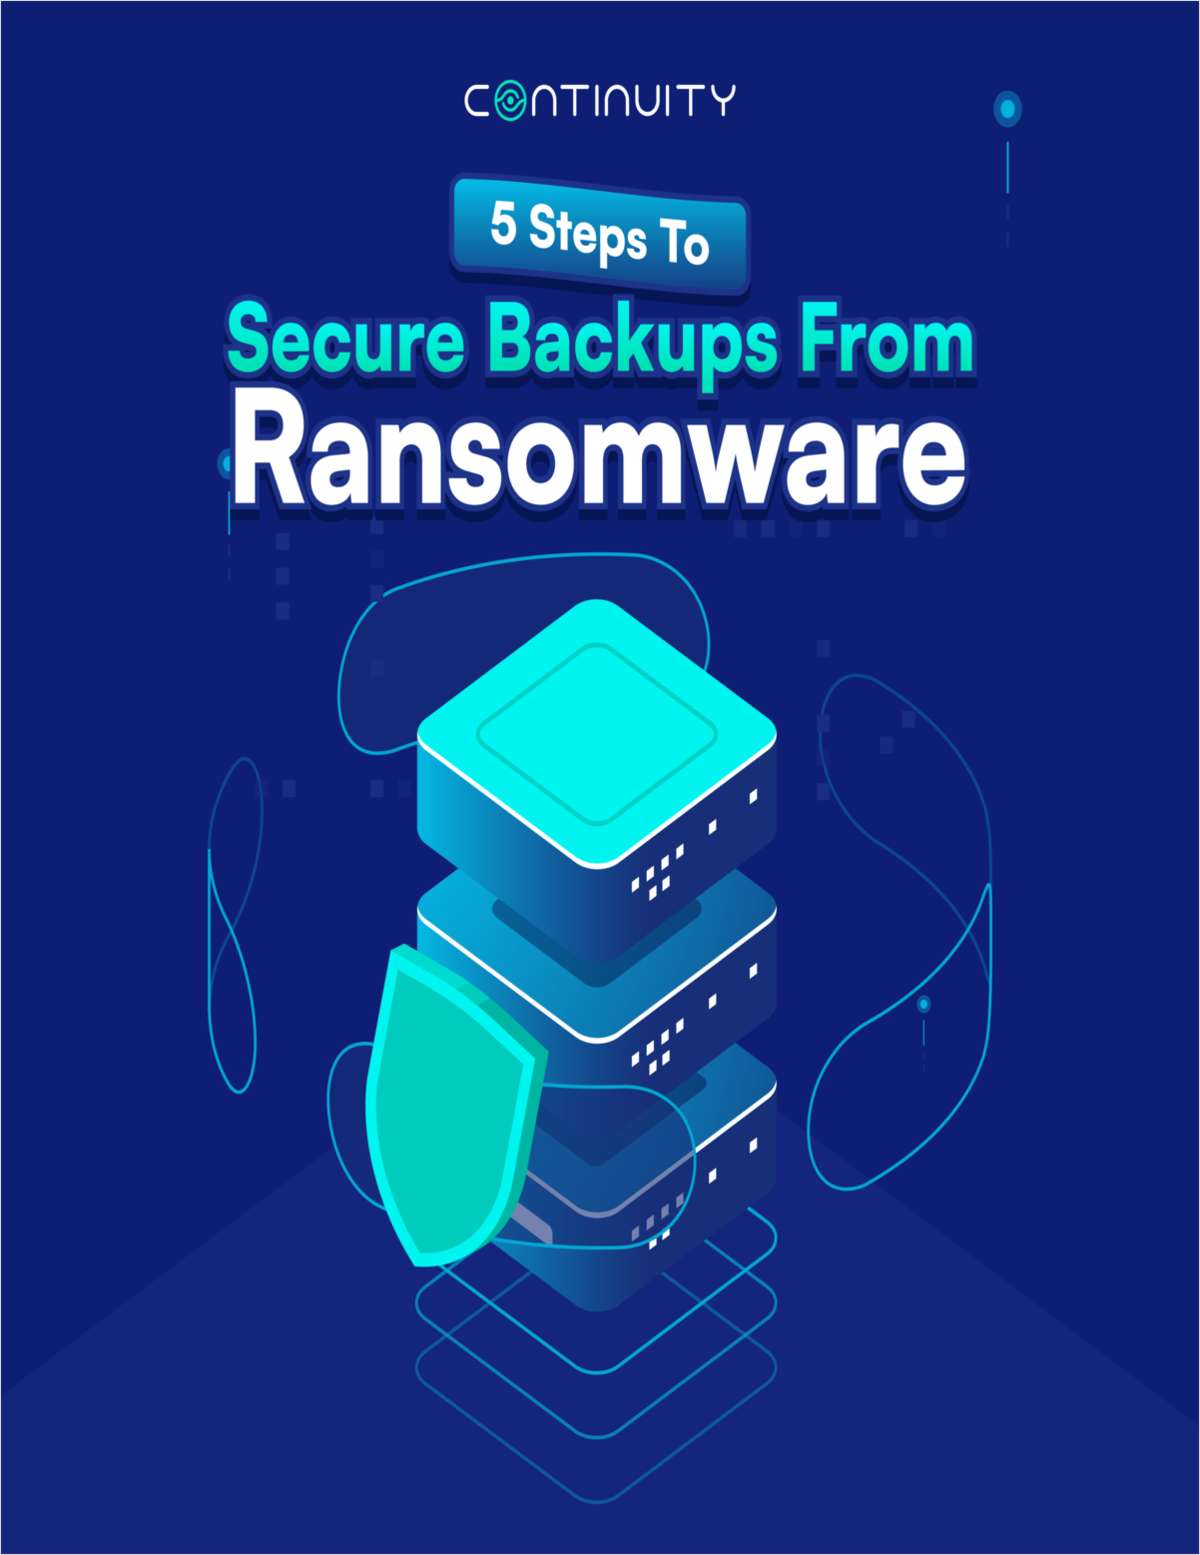 5 Steps To Secure Backups From Ransomware